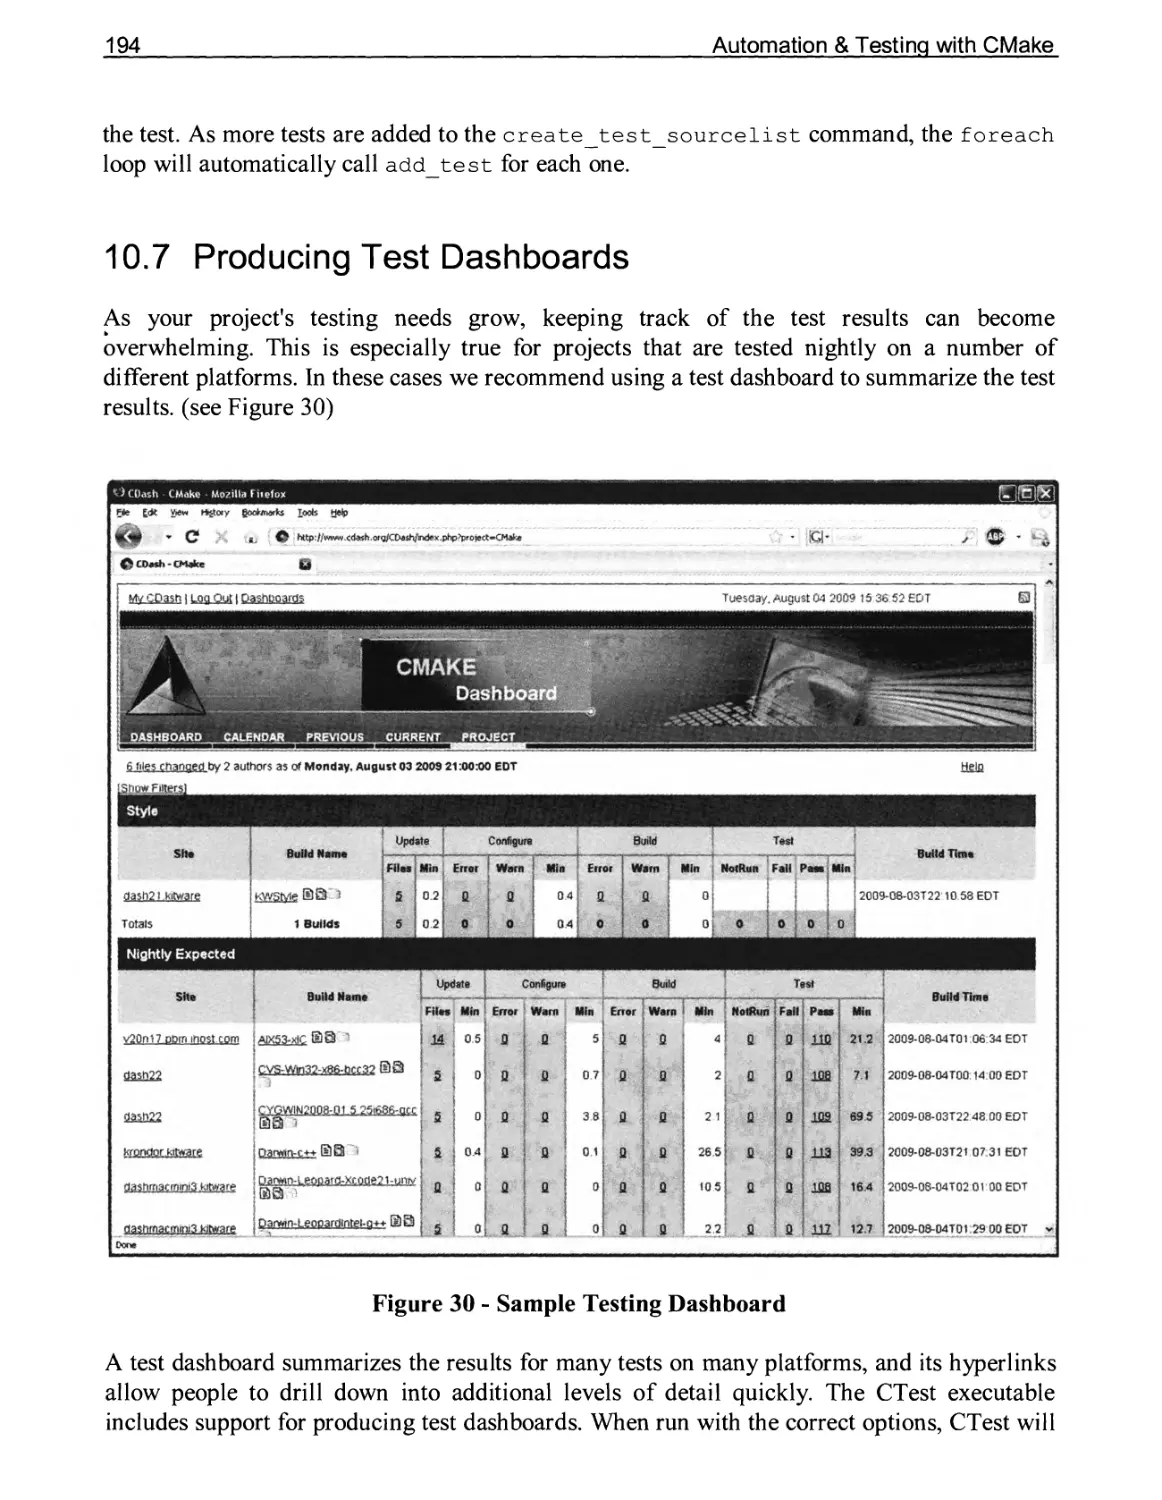 10.7 Producing Test Dashboards